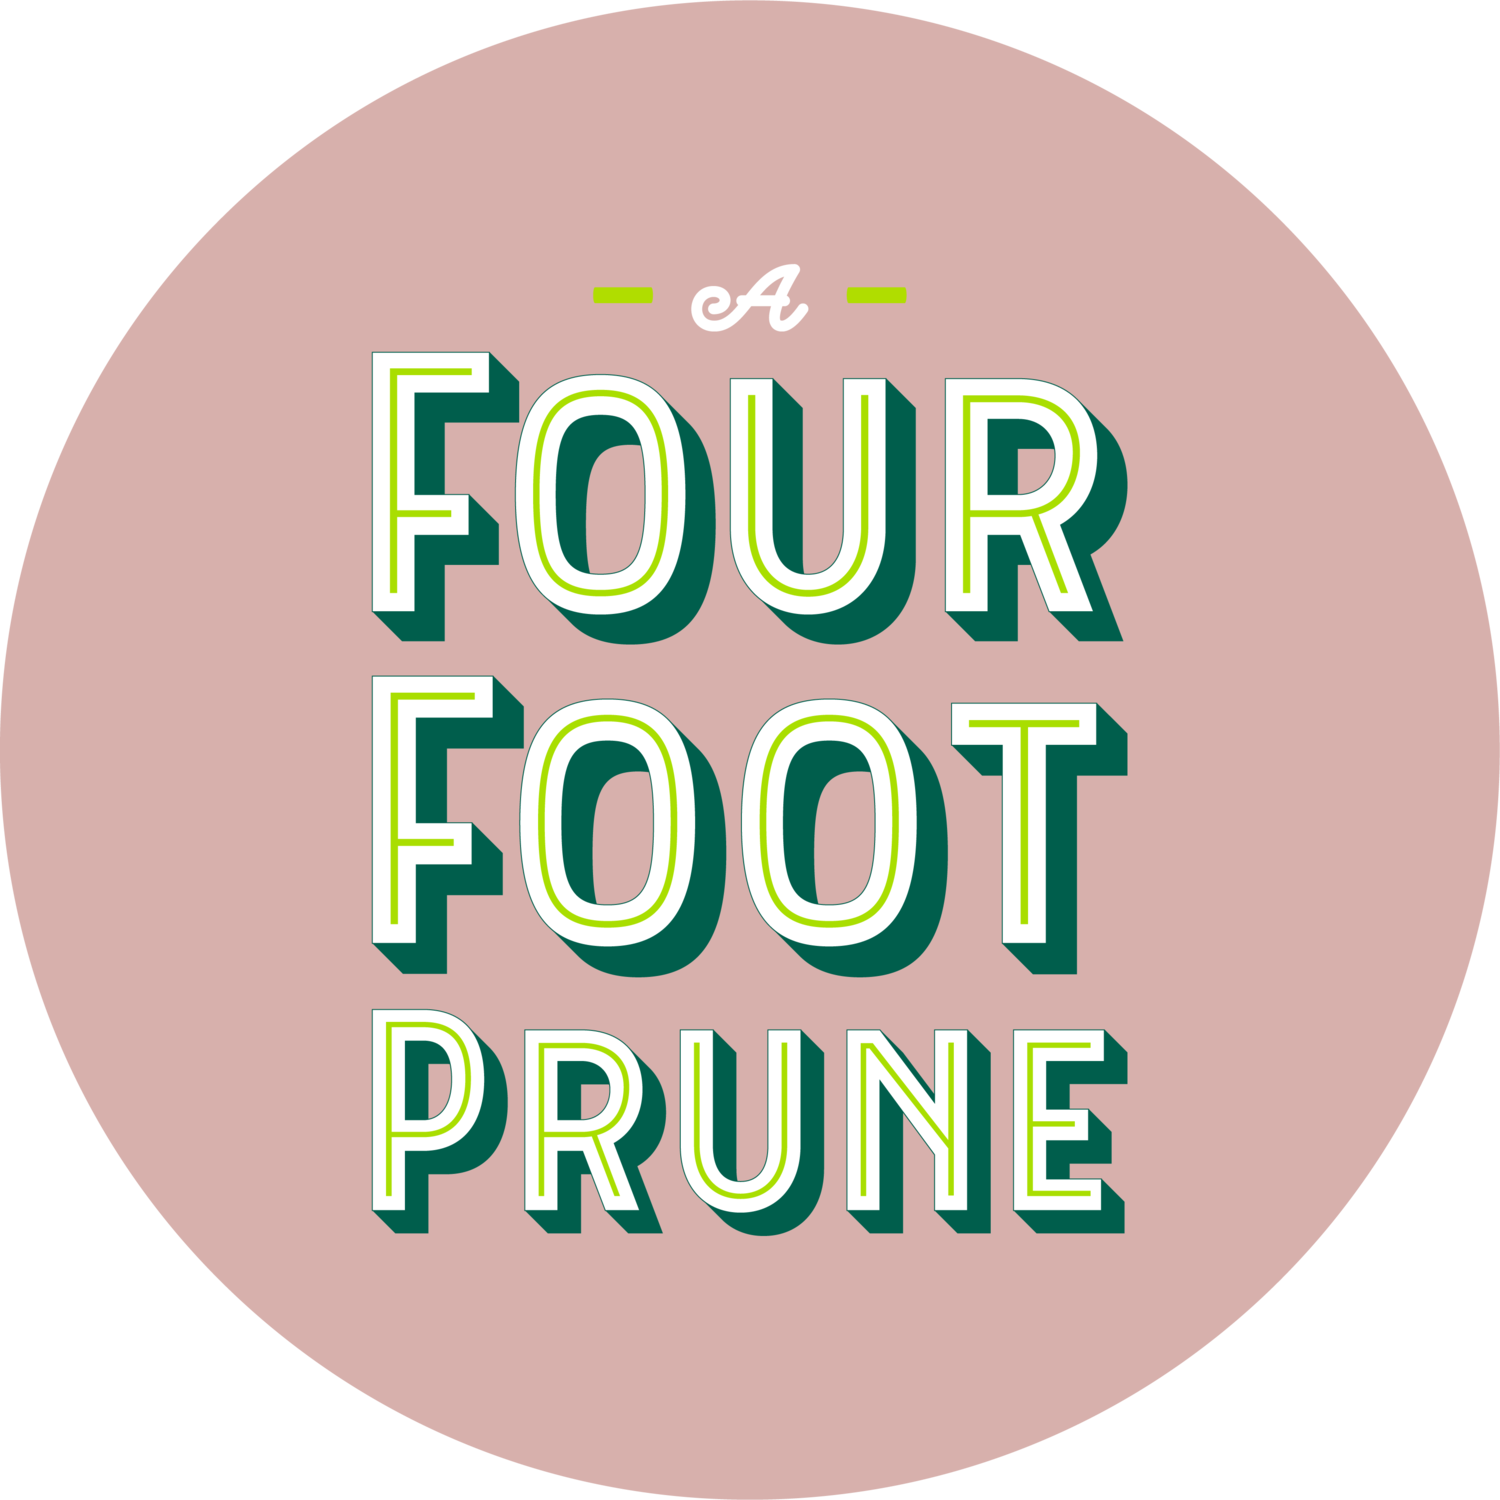 A Four Foot Prune